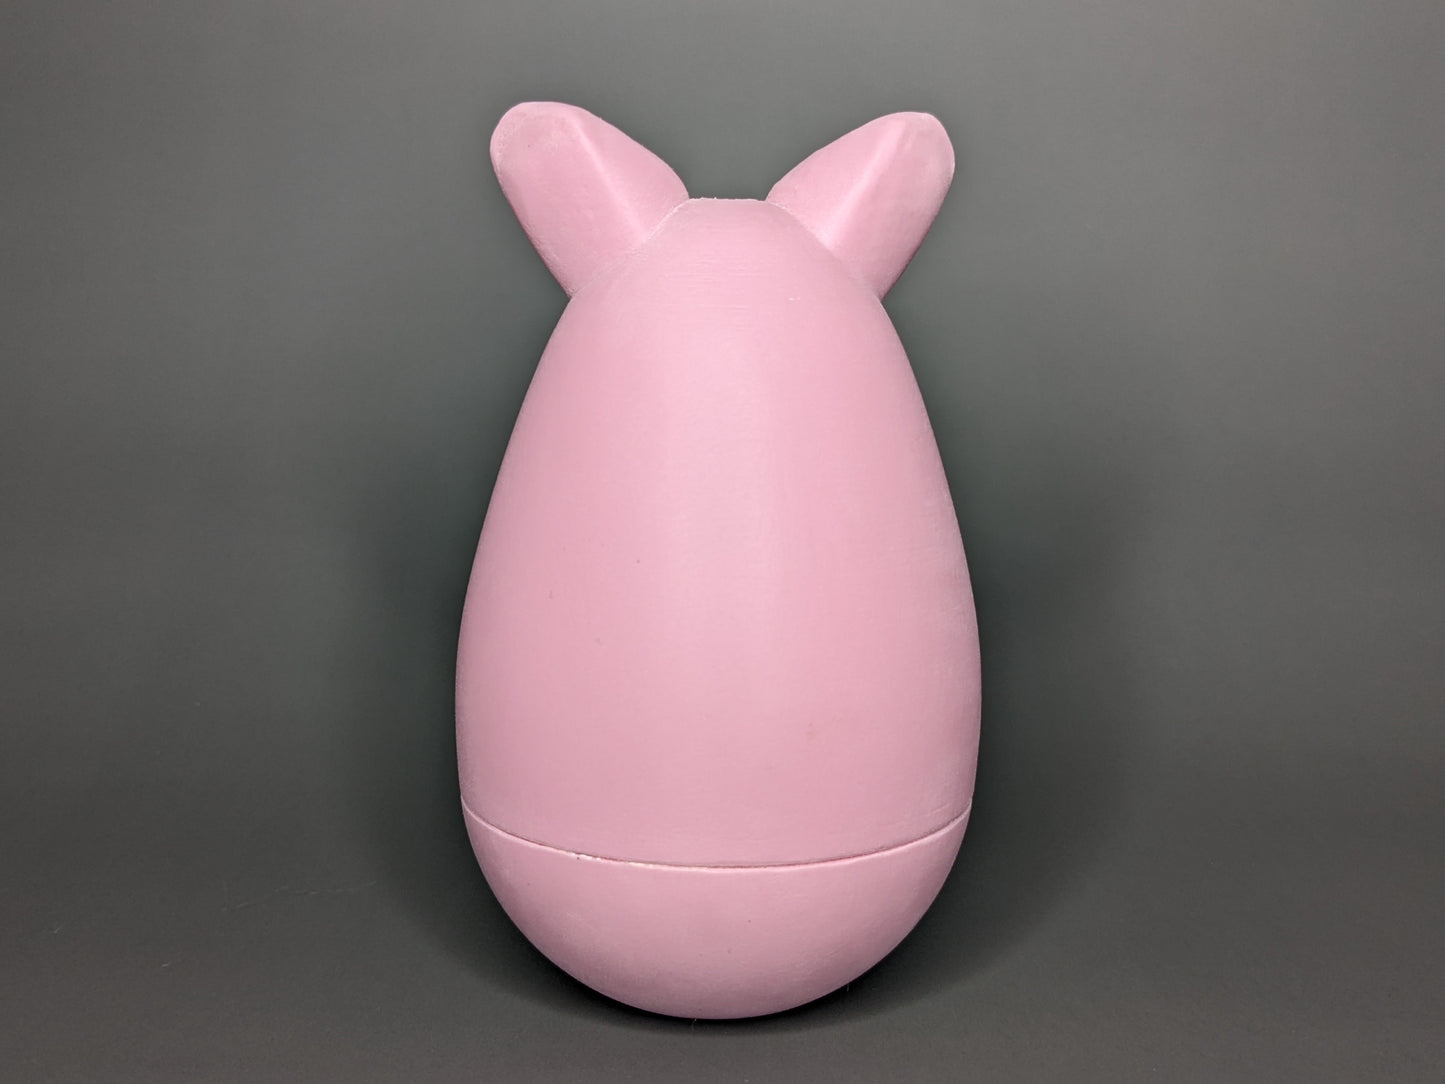 The back-side of the Kalua the Peeg tama. It is a pink egg-shaped 3d-printed tama with ears sticking out of the top of the egg shape. A seam sits just below the widest point of the tama.